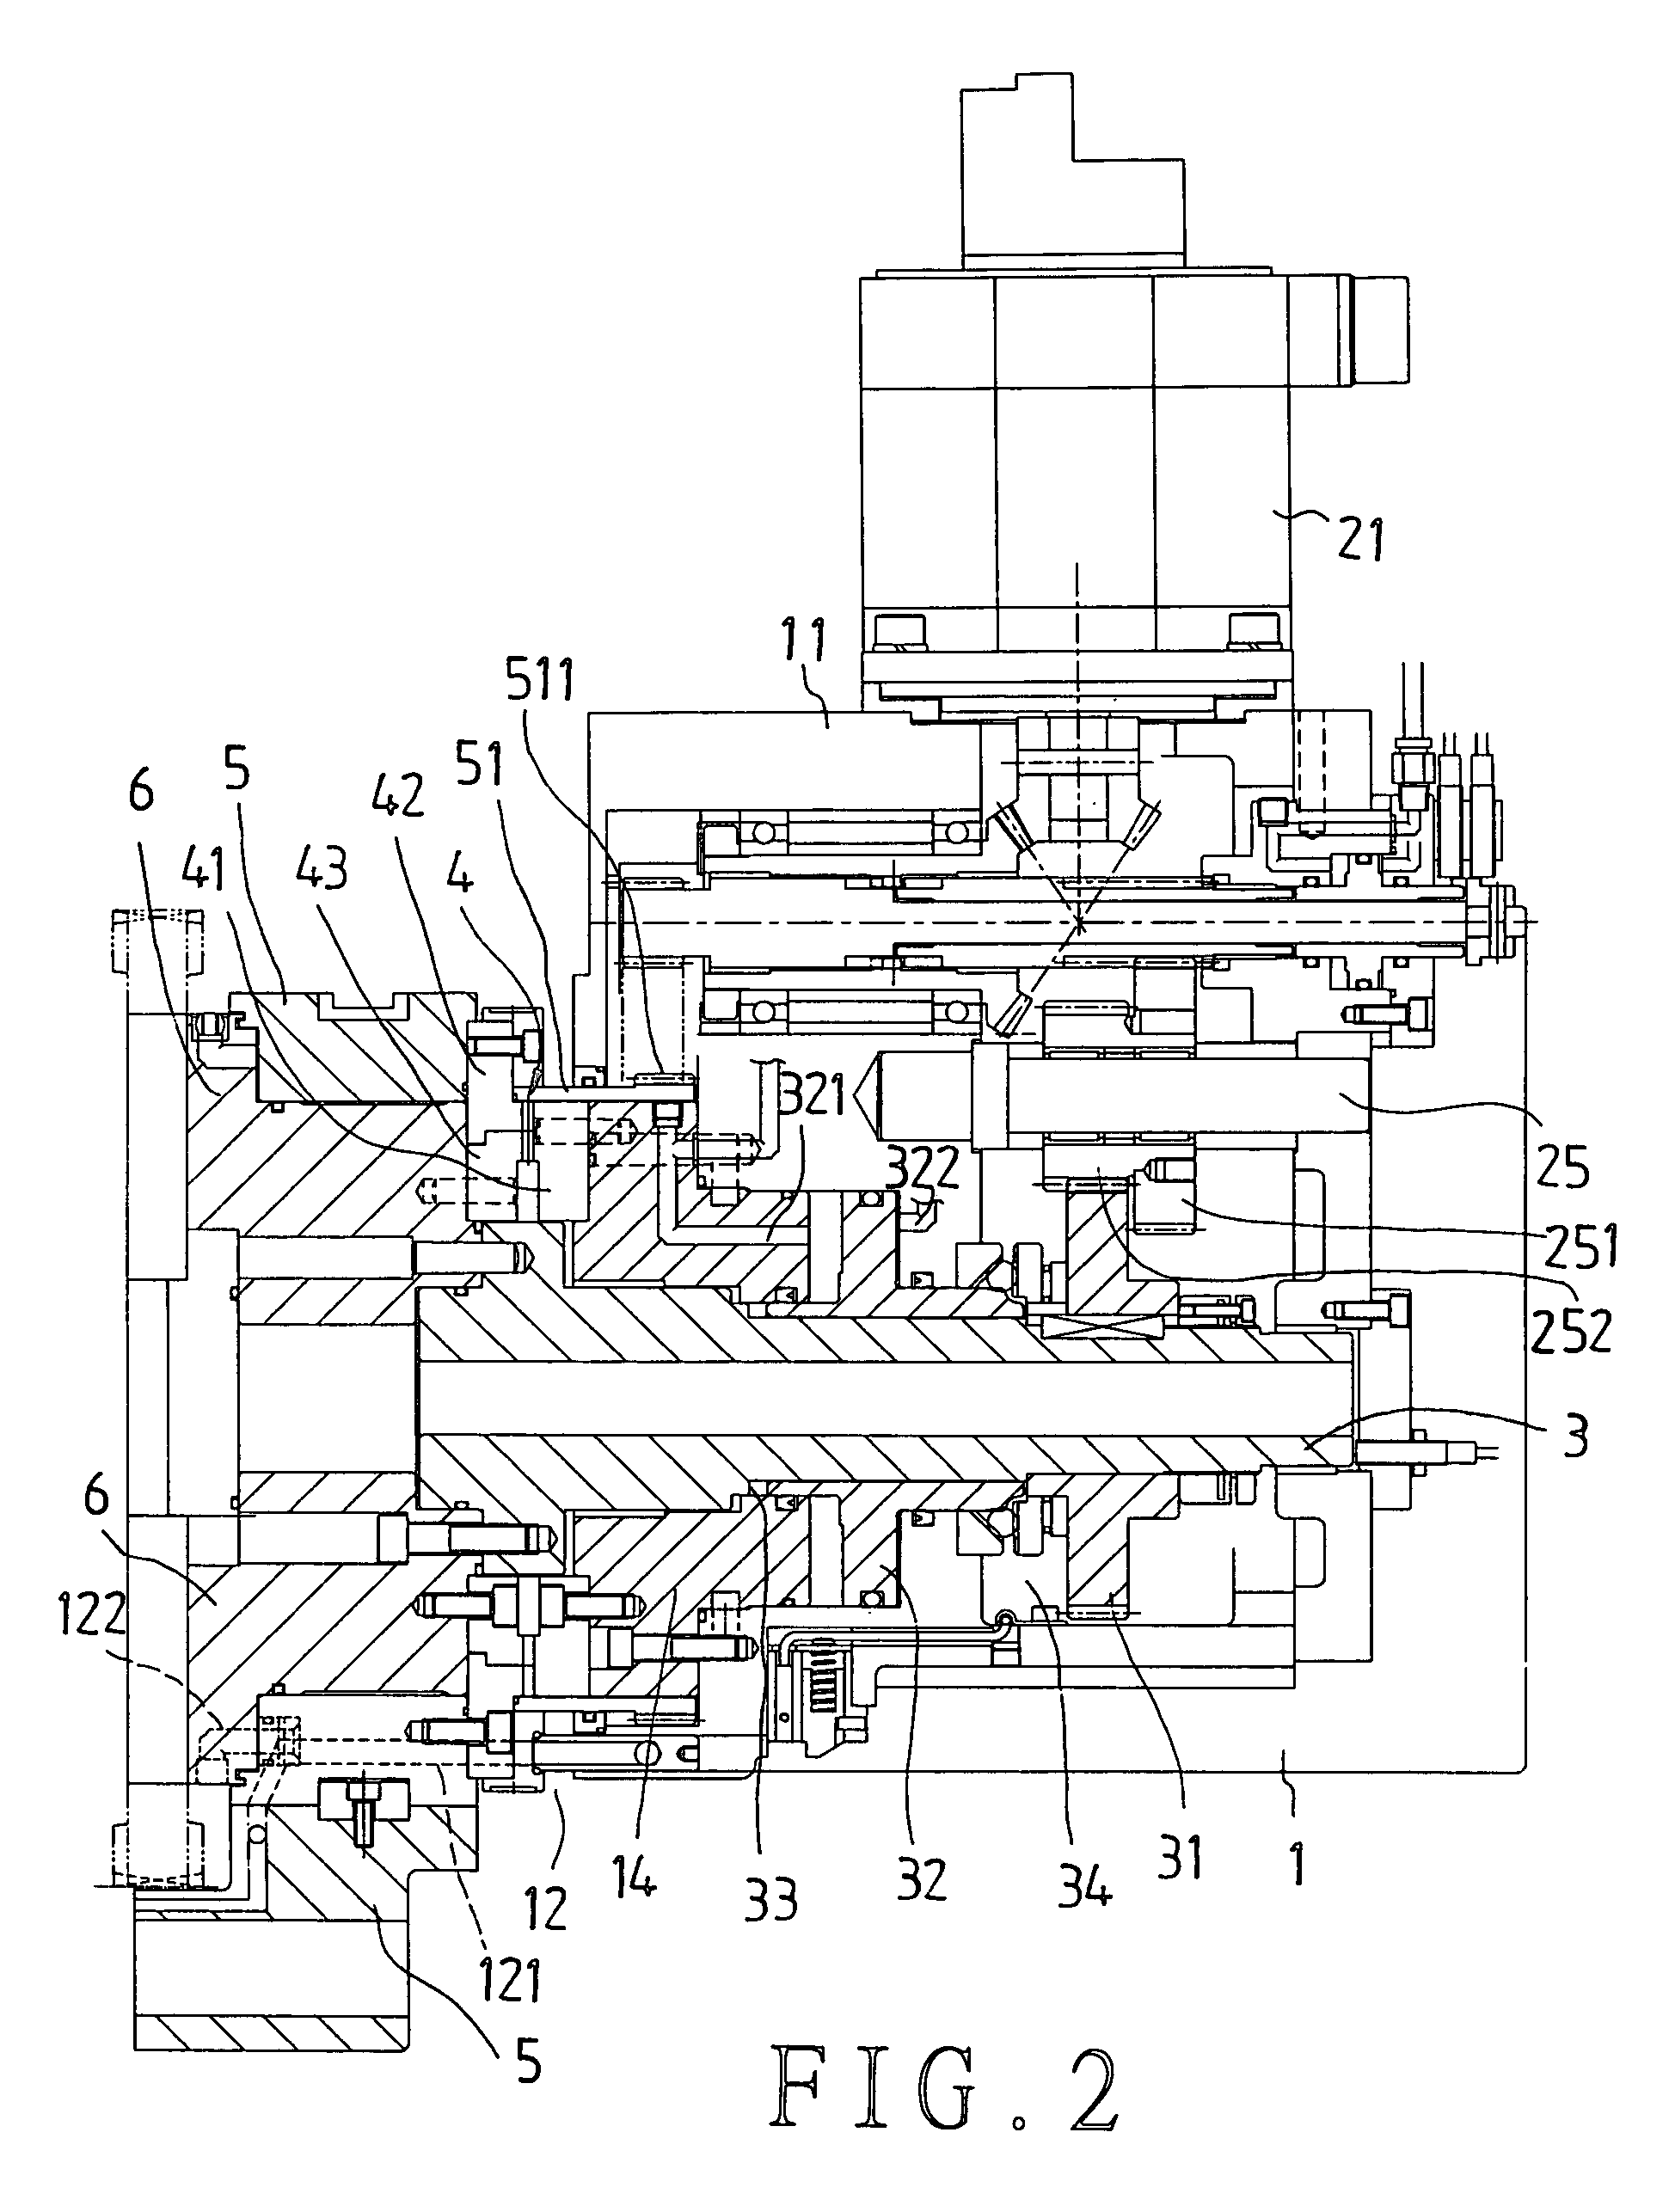 Structure of a twin disc type tool turret mechanism for CNC machines